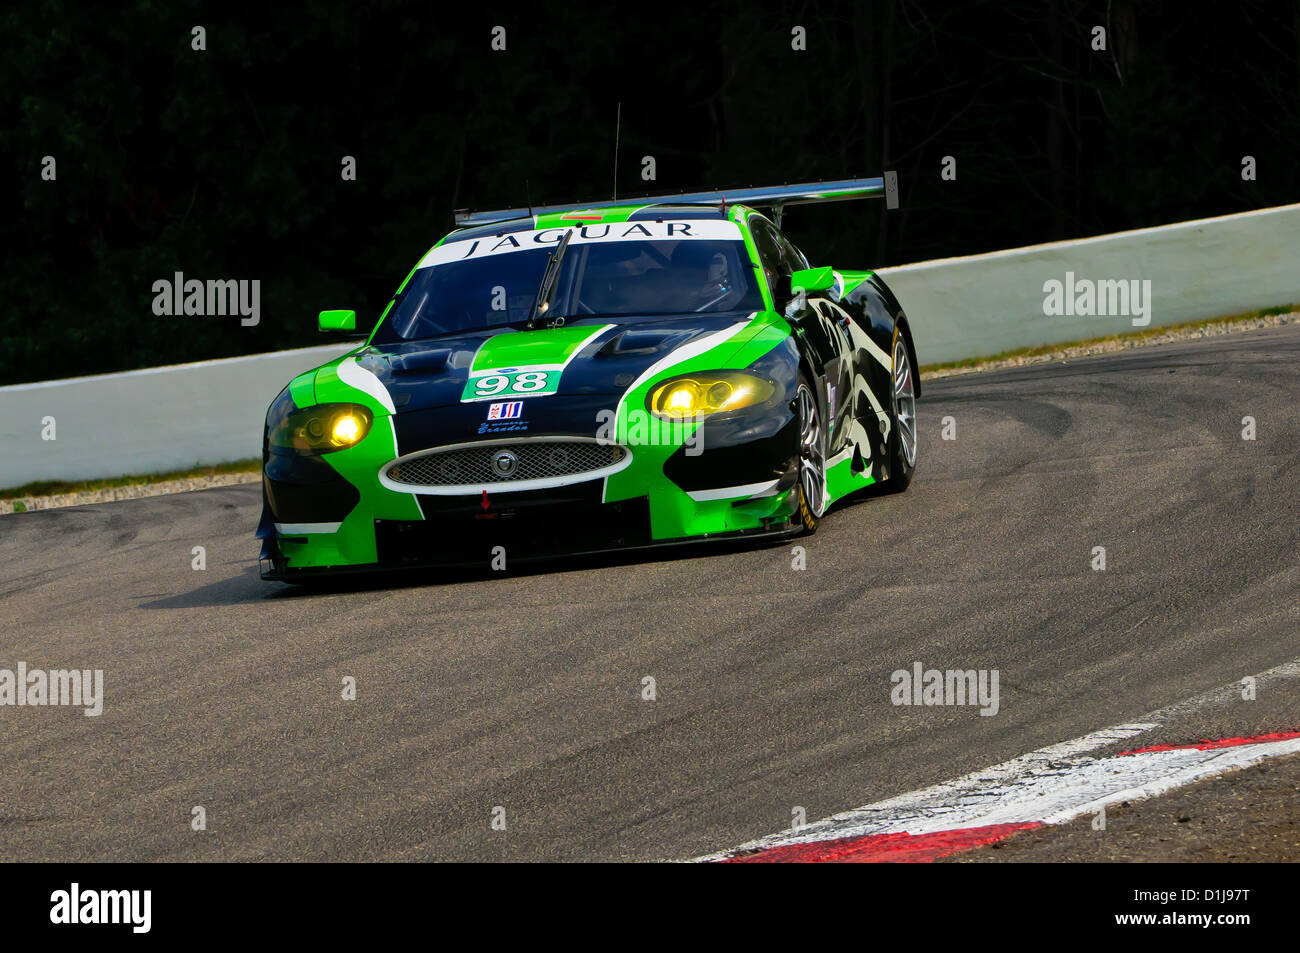 The top finishing Jaguar XKR of drivers Jones and Moran speeds through turn 3 during Saturday's practice session Stock Photo